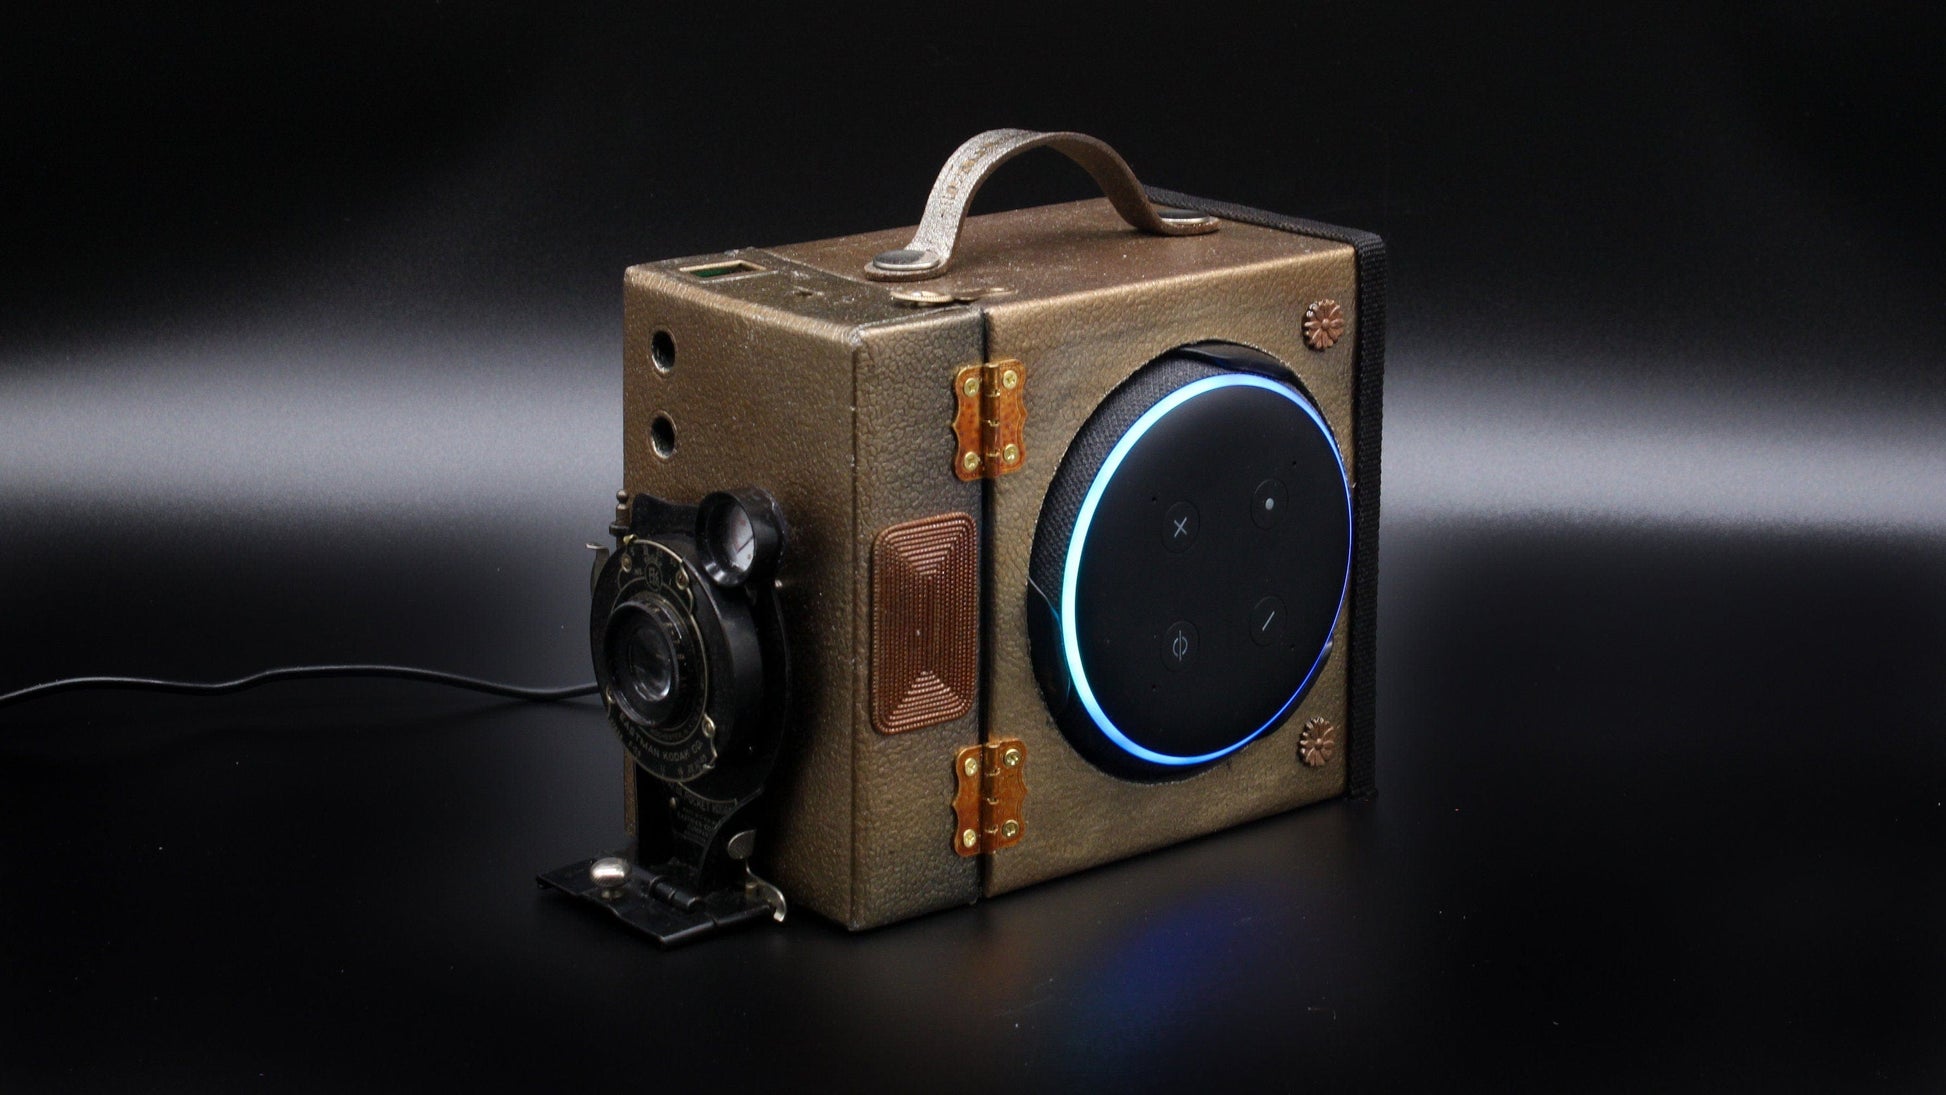 LightAndTimeArt Steampunk Speaker Steampunk Amazon 3rd Gen Echo Dot Holder/Stand, Gifts for Geeks, Electronic Audio gadget for him and her, signed & numbered artwork